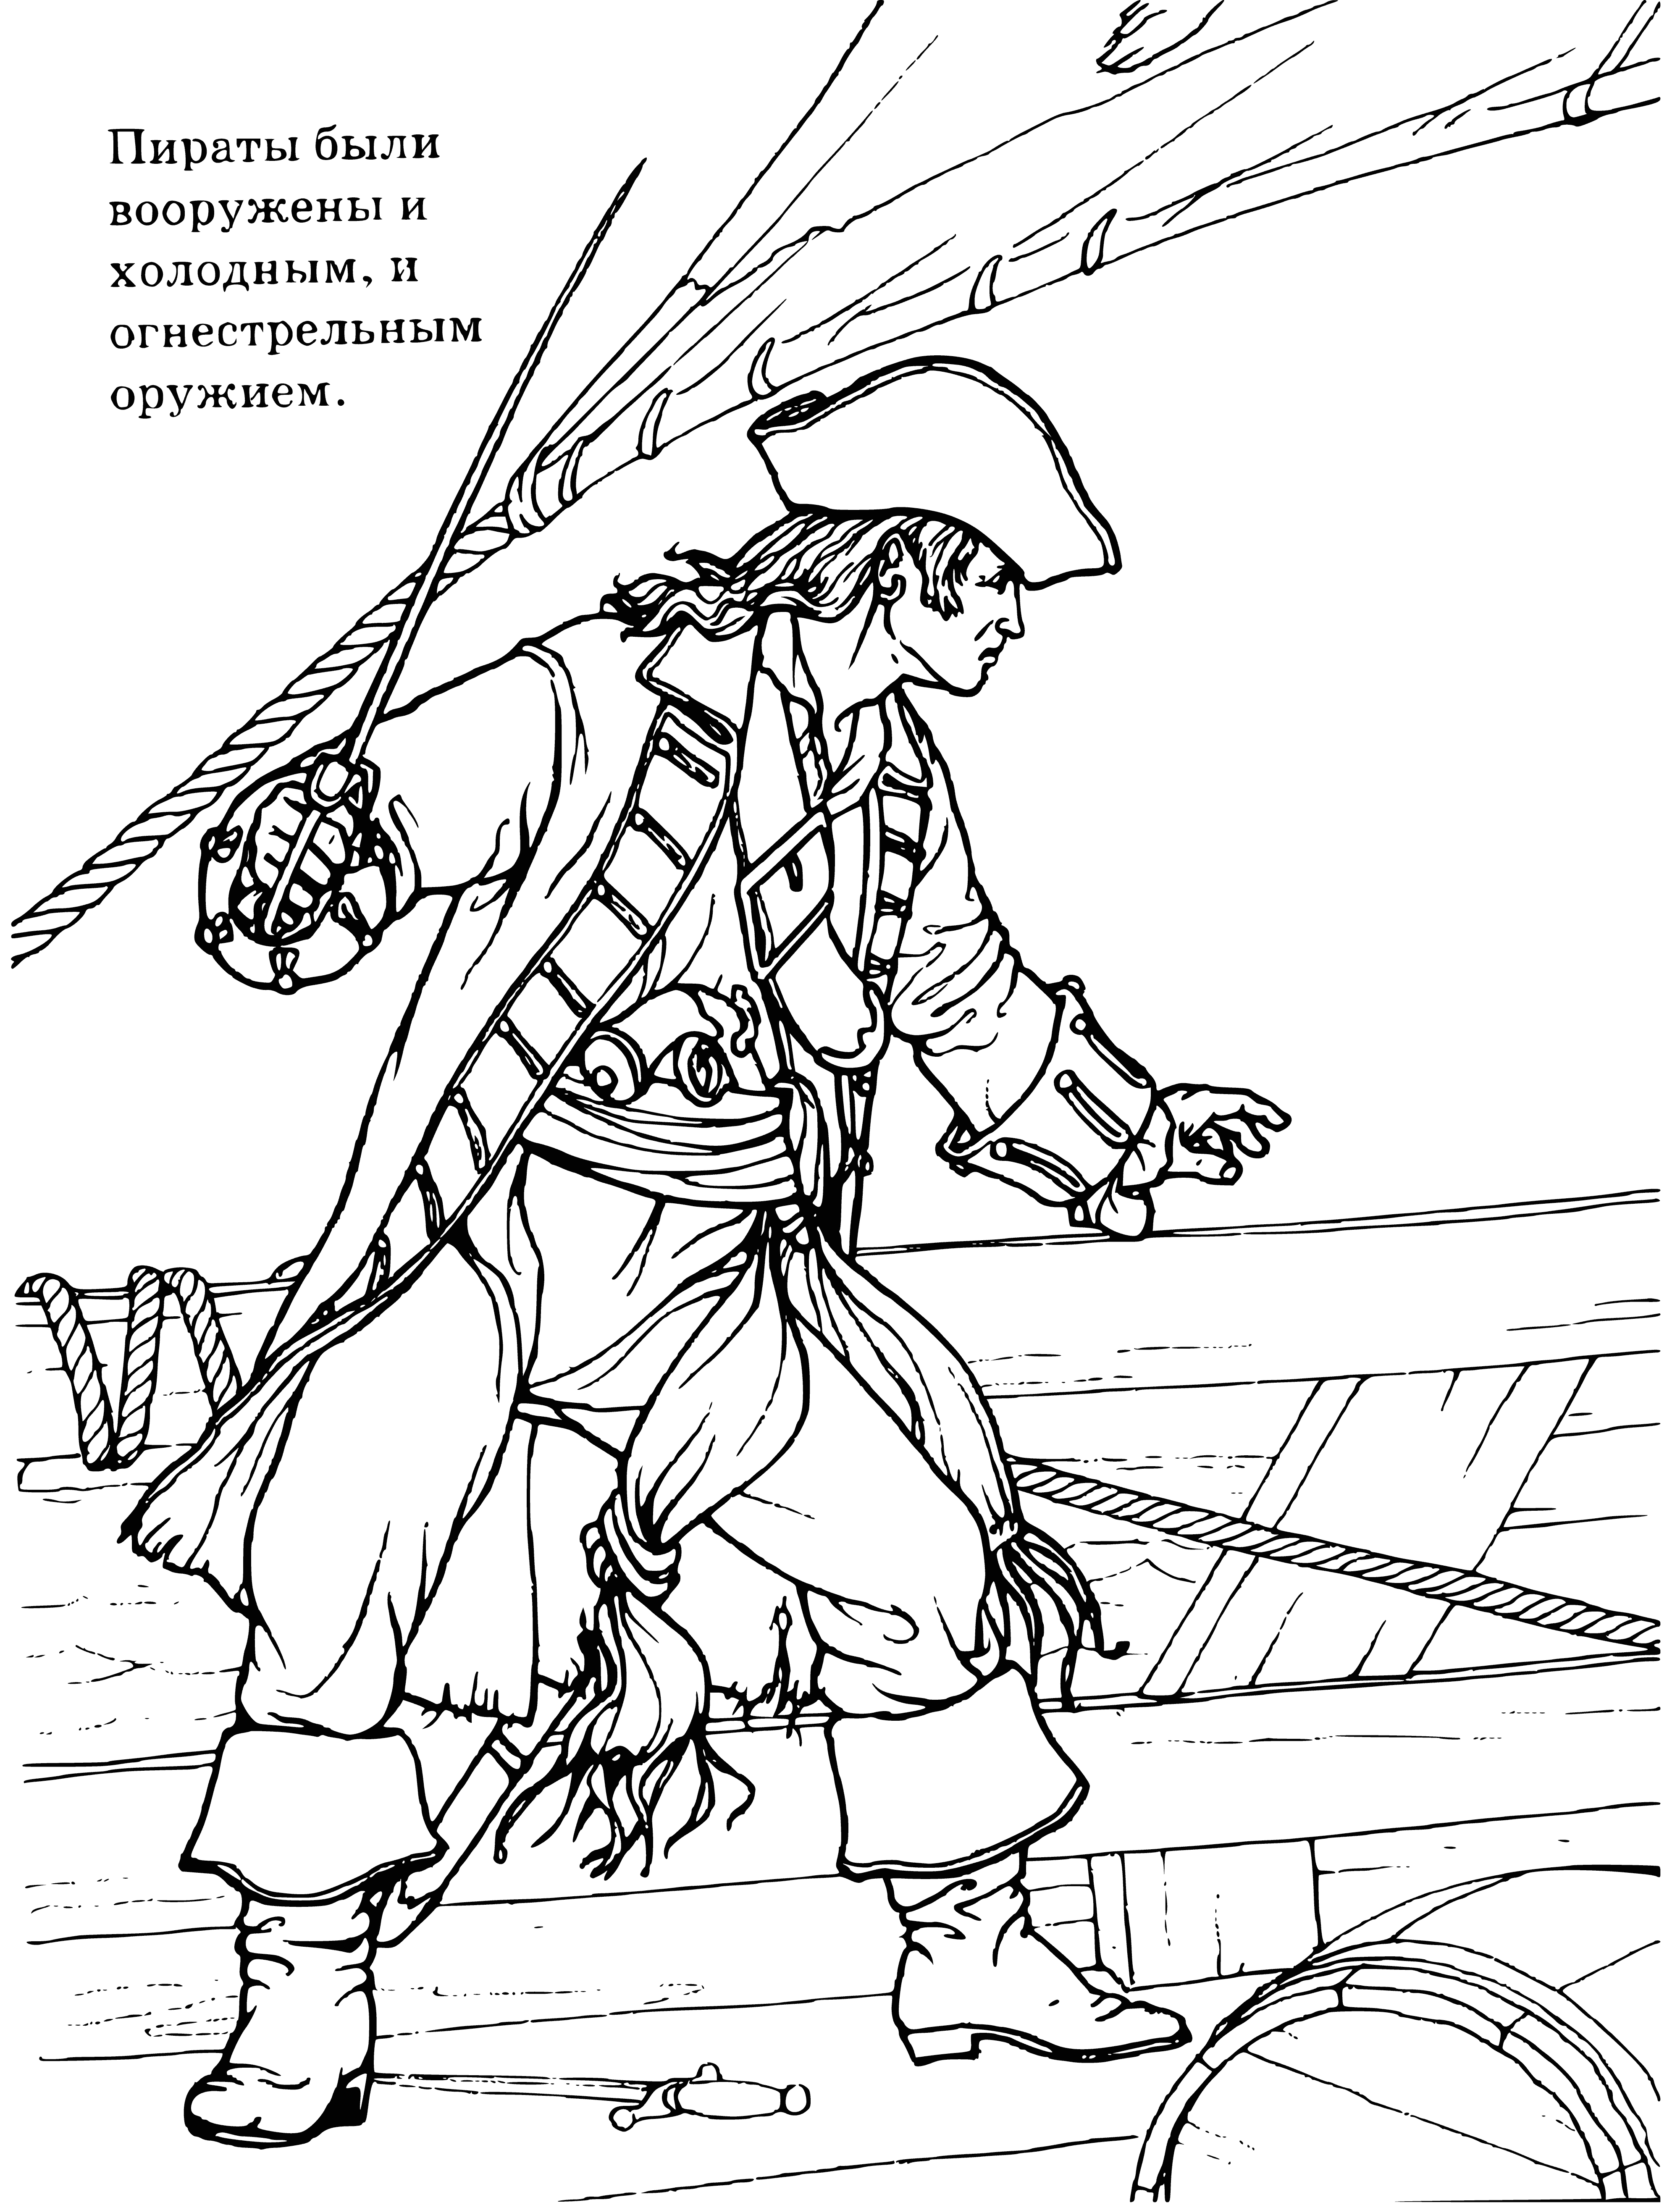 coloring page: Men on ship fire cannon at sail of other ship to slow it down, making it hard to see with smoke of cannons. Men on deck work hard to reload.